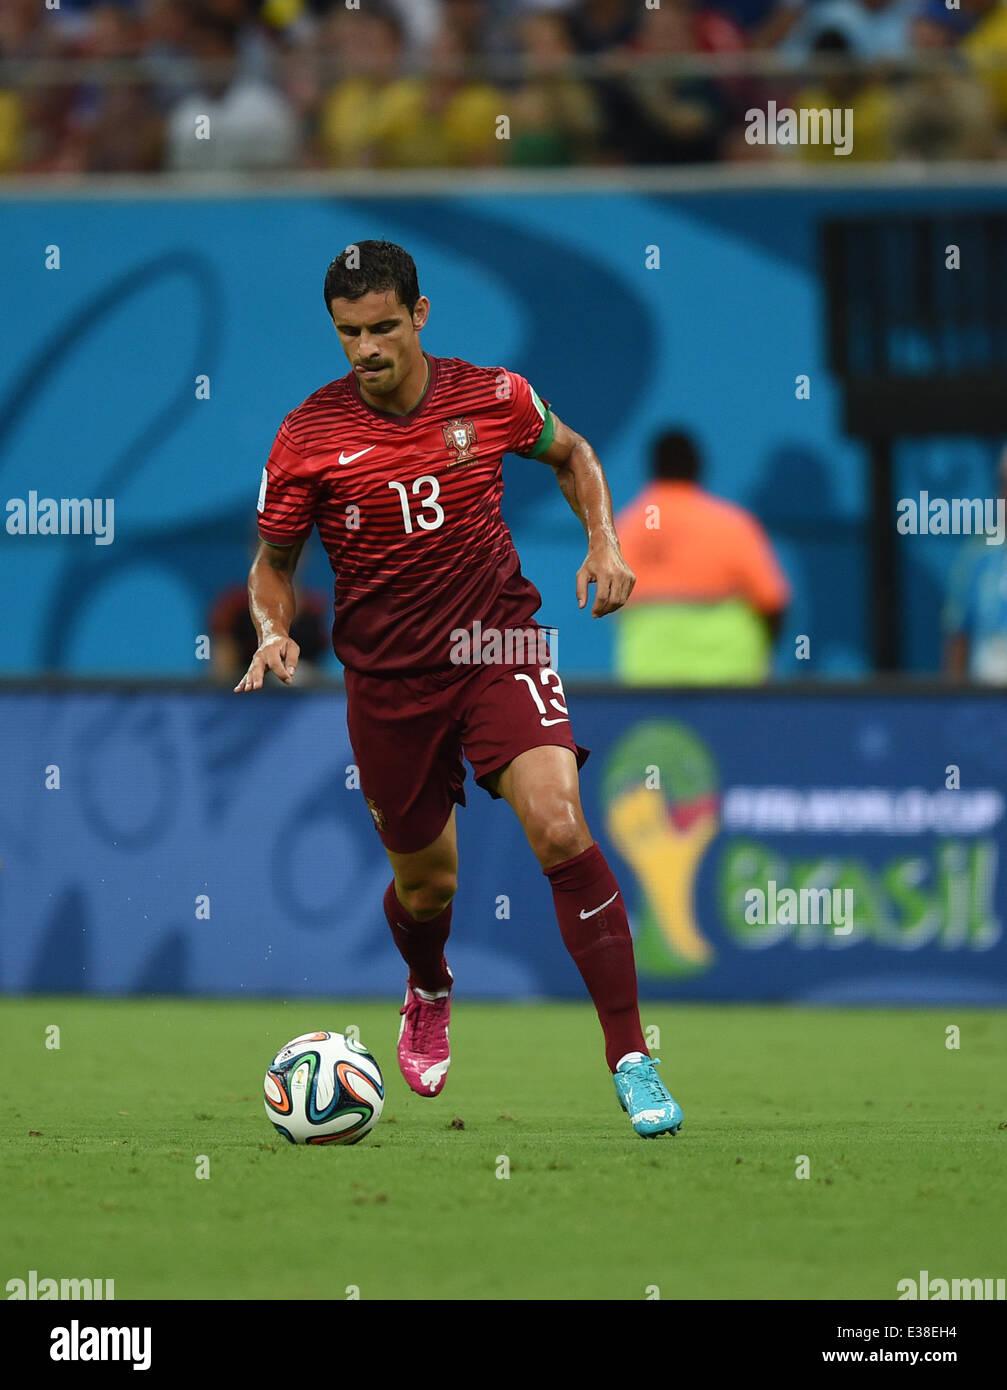 Manaus, Brazil. 22nd June, 2014. Ricardo Costa of Portugal in action during the FIFA World Cup 2014 group G preliminary round match between the USA and Portugal at the Arena Amazonia Stadium in Manaus, Brazil, 22 June 2014. Photo: Marius Becker/dpa/Alamy Live News Stock Photo